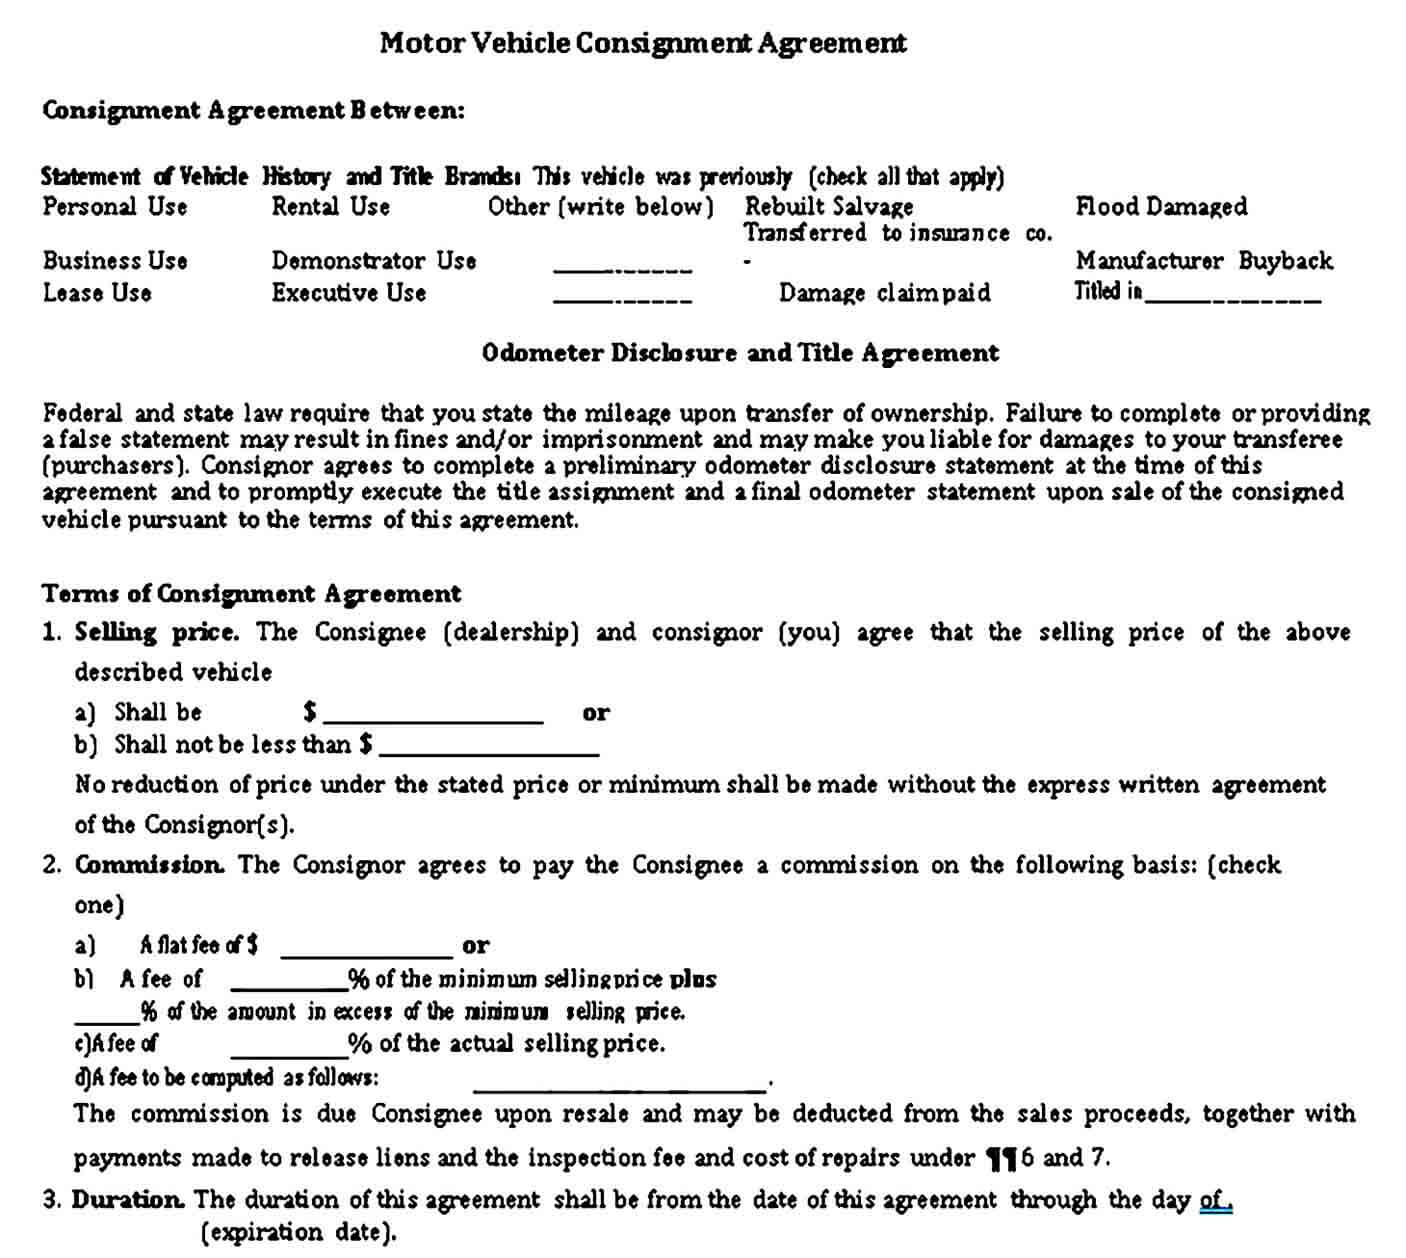 Motor Vehicle Consignment Agreement